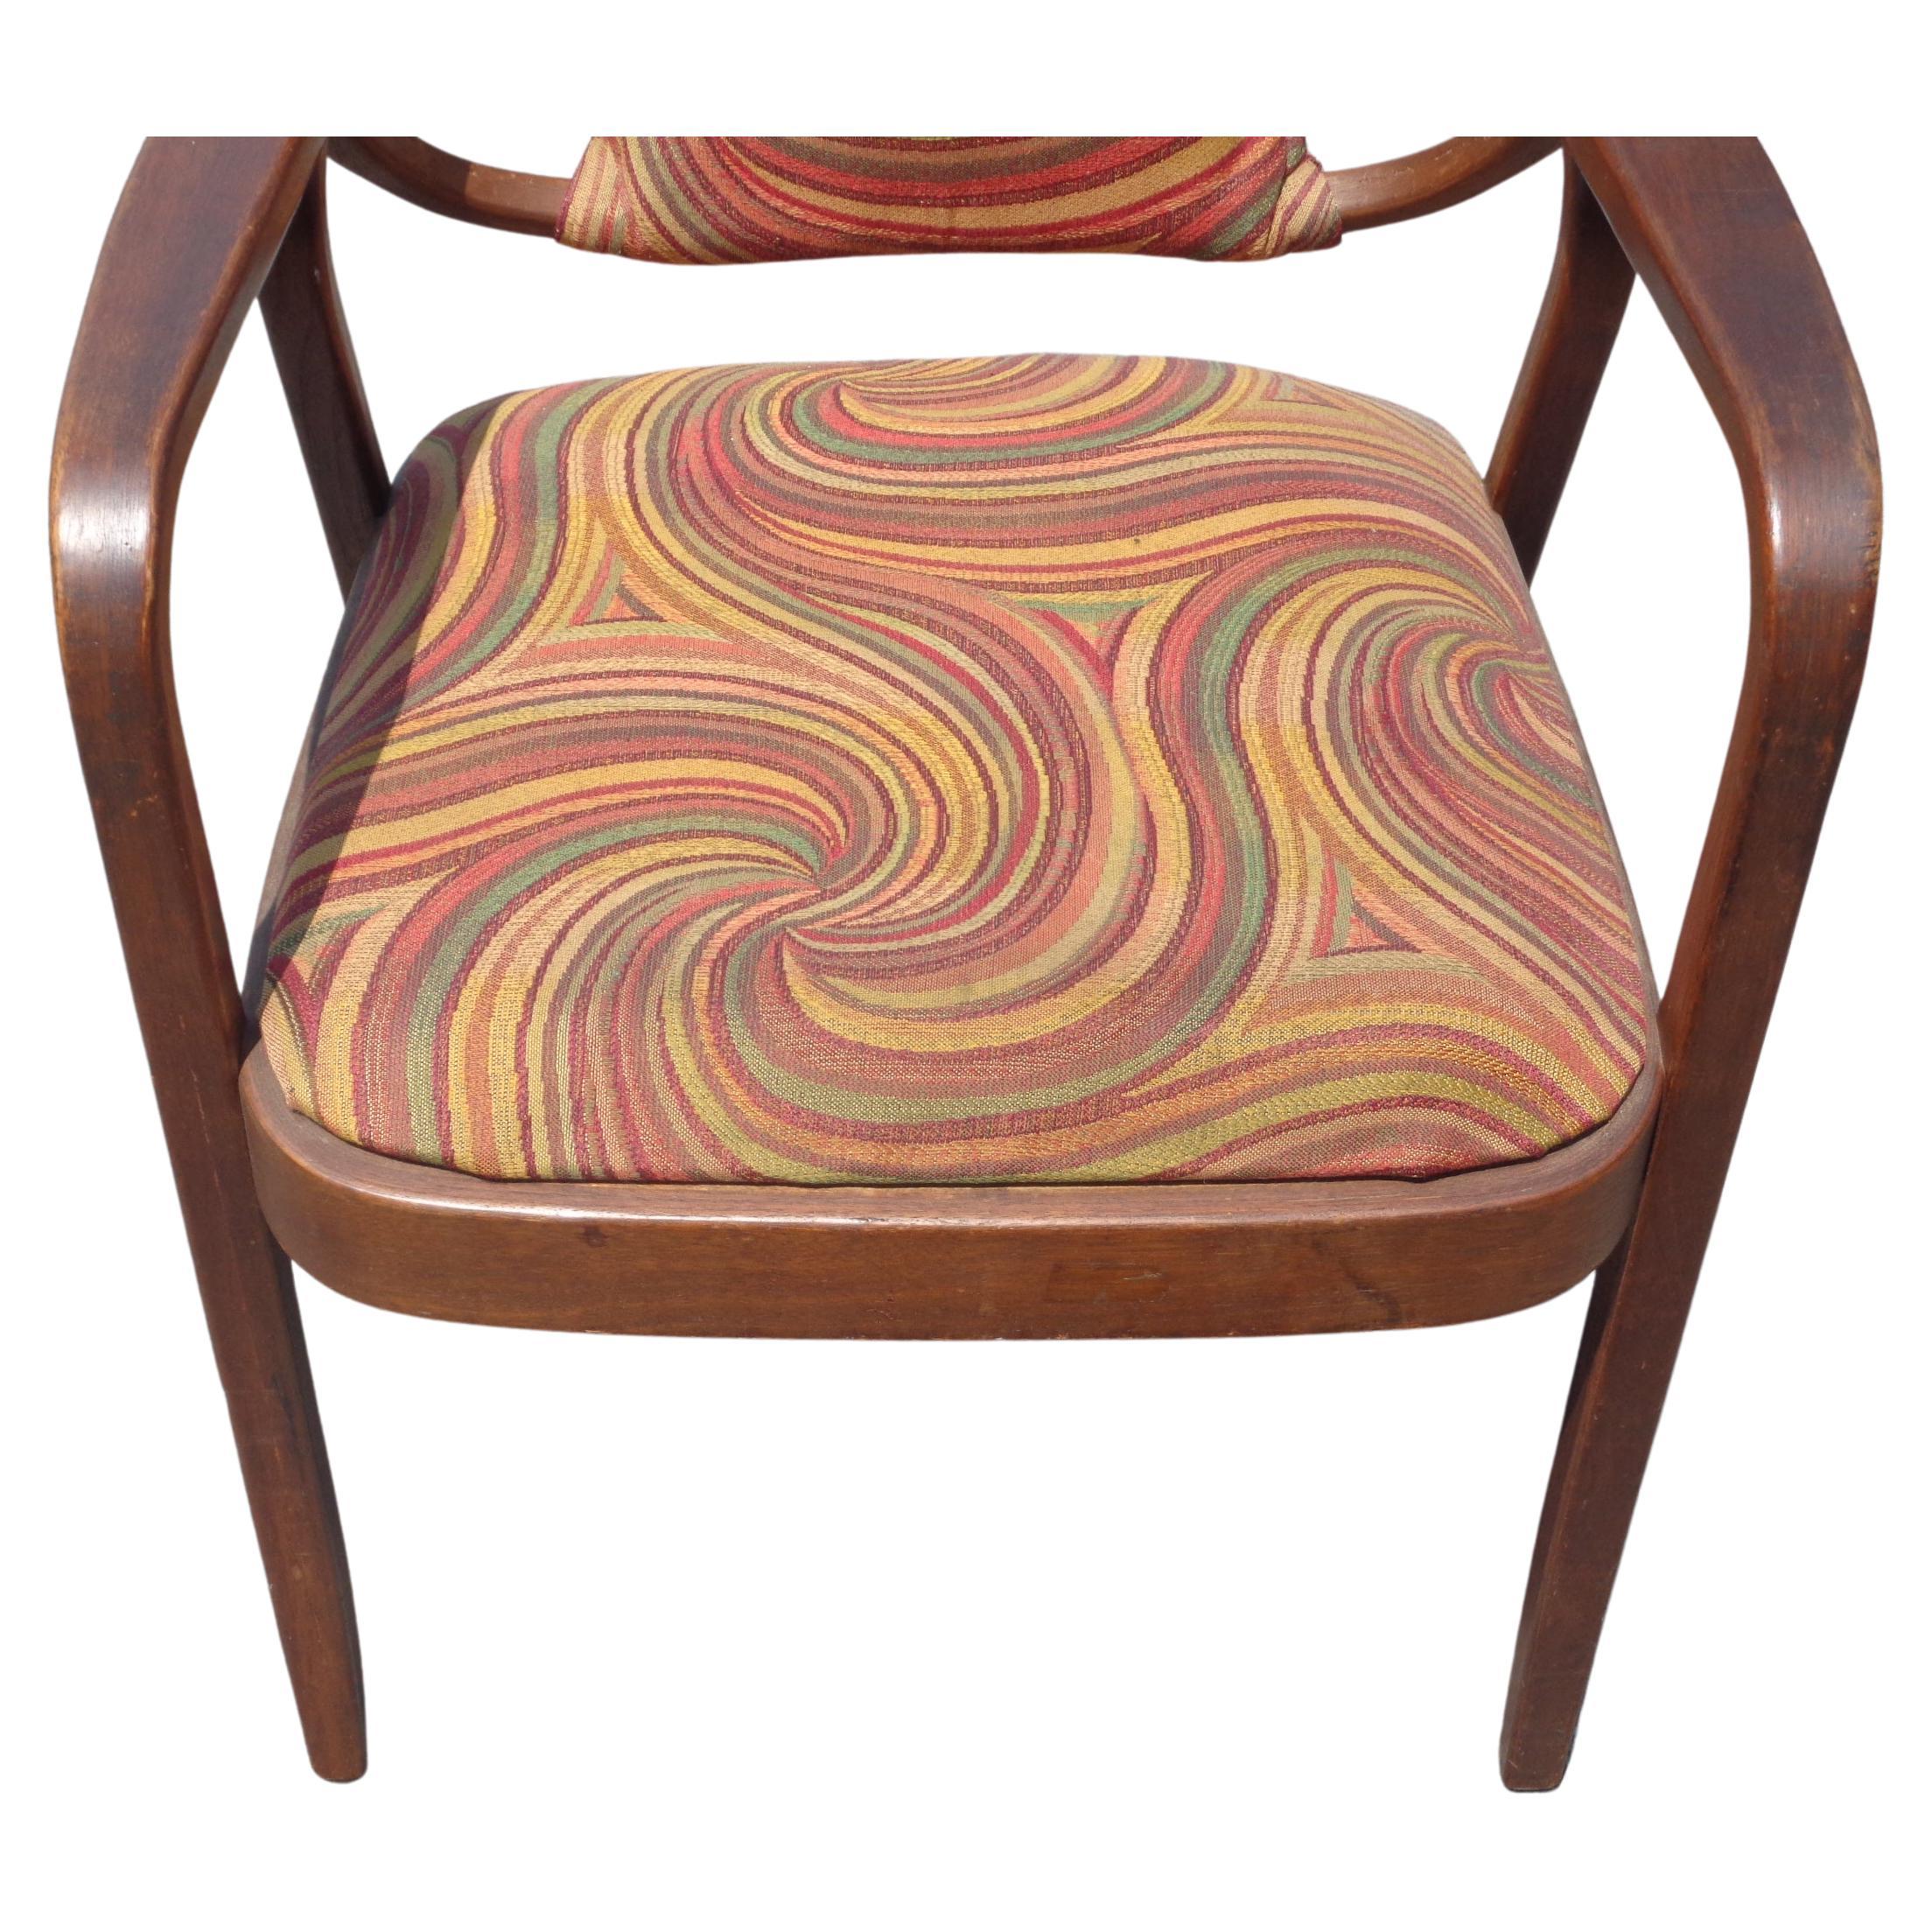 Bentwood Walnut Armchair #1105 by Don Pettit for Knoll, 1960's 2